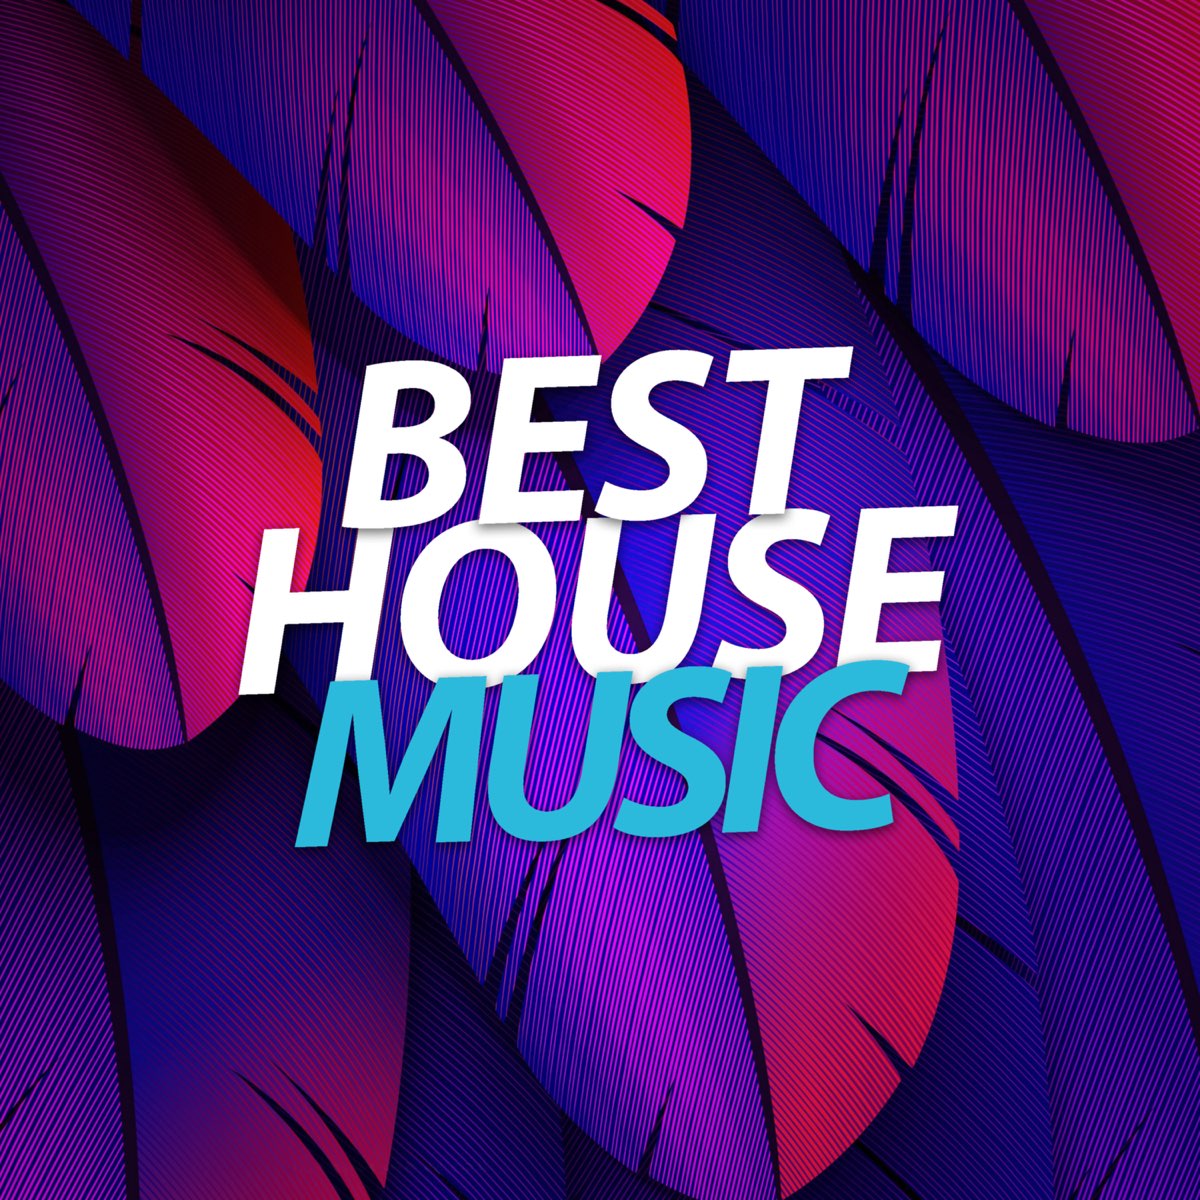 ‎Best House Music Album by House Music Apple Music